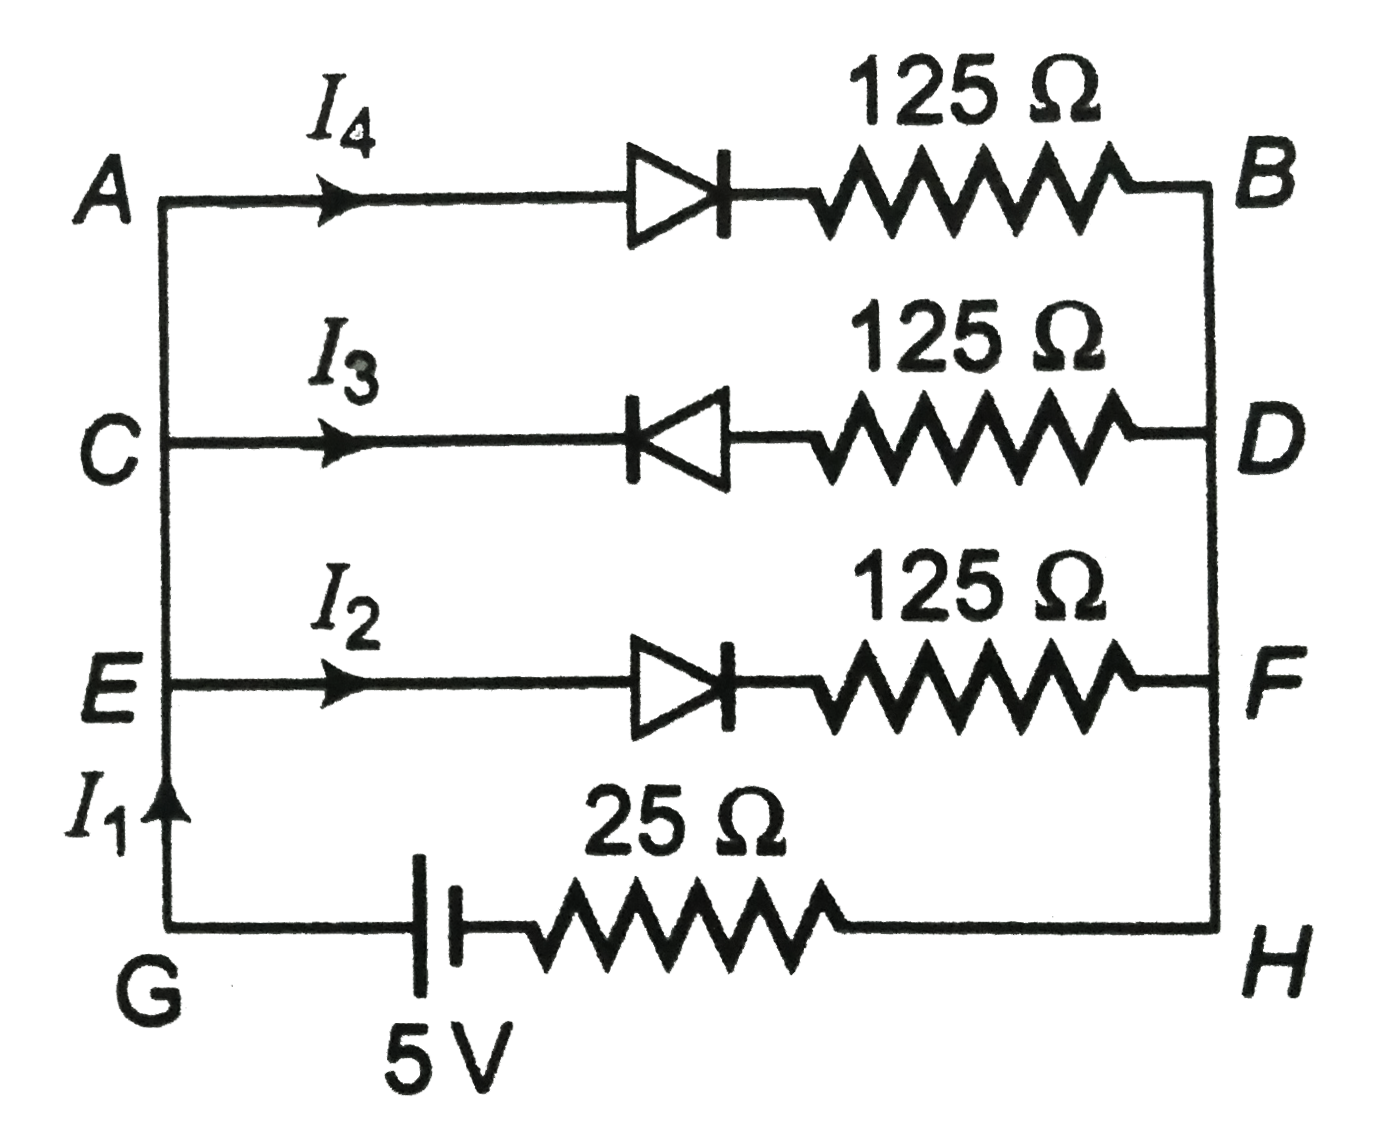 If each diode in figure has a forward bias resistance of 25 Omega and infinite resistance in reverse bias, what will be the values of  the current  I1 , I2 , I3 and I4?